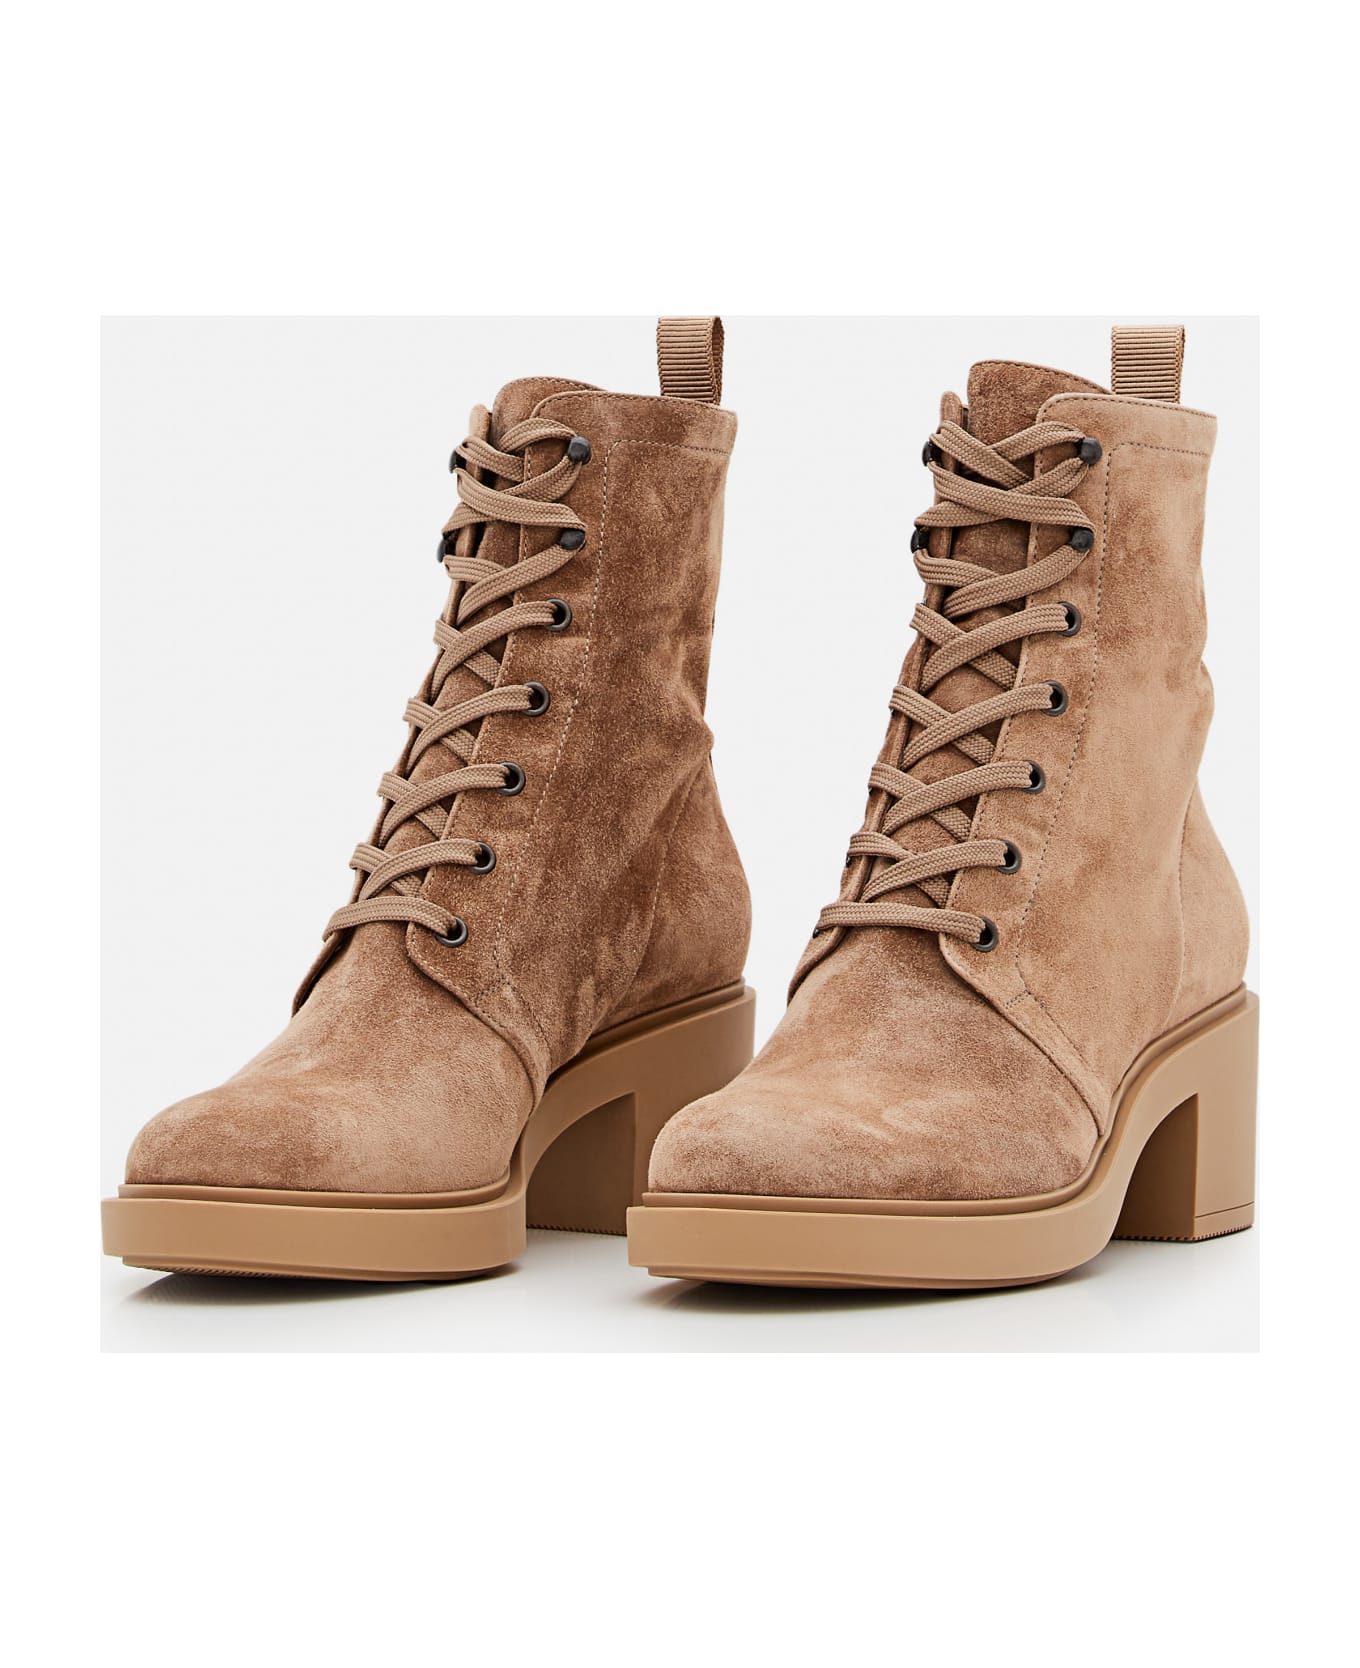 Gianvito Rossi Foster Lace-up Suede Boots - Camoscio Camel